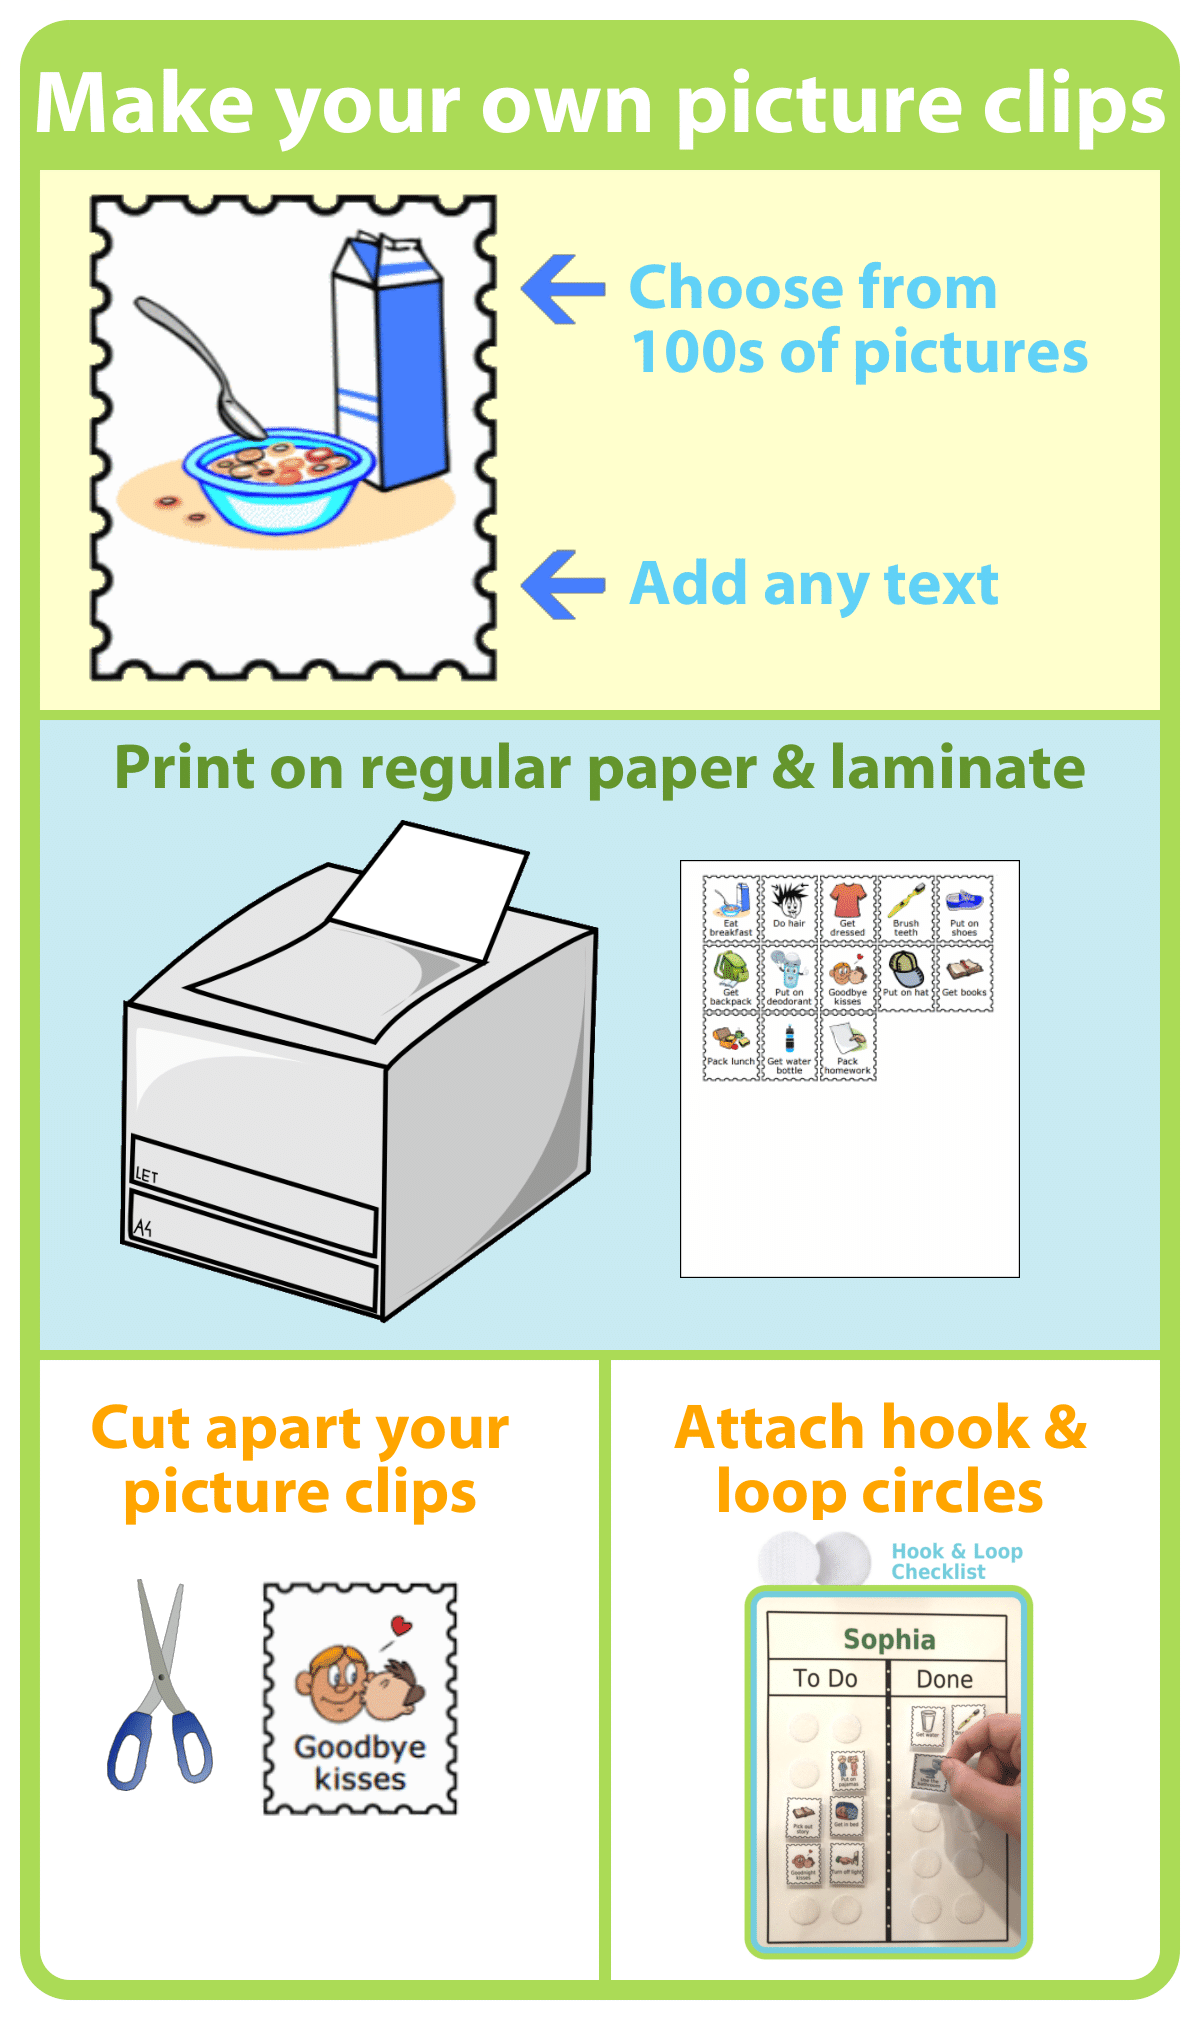 Choose a picture and write any text to create a hook & loop checklist for your kids